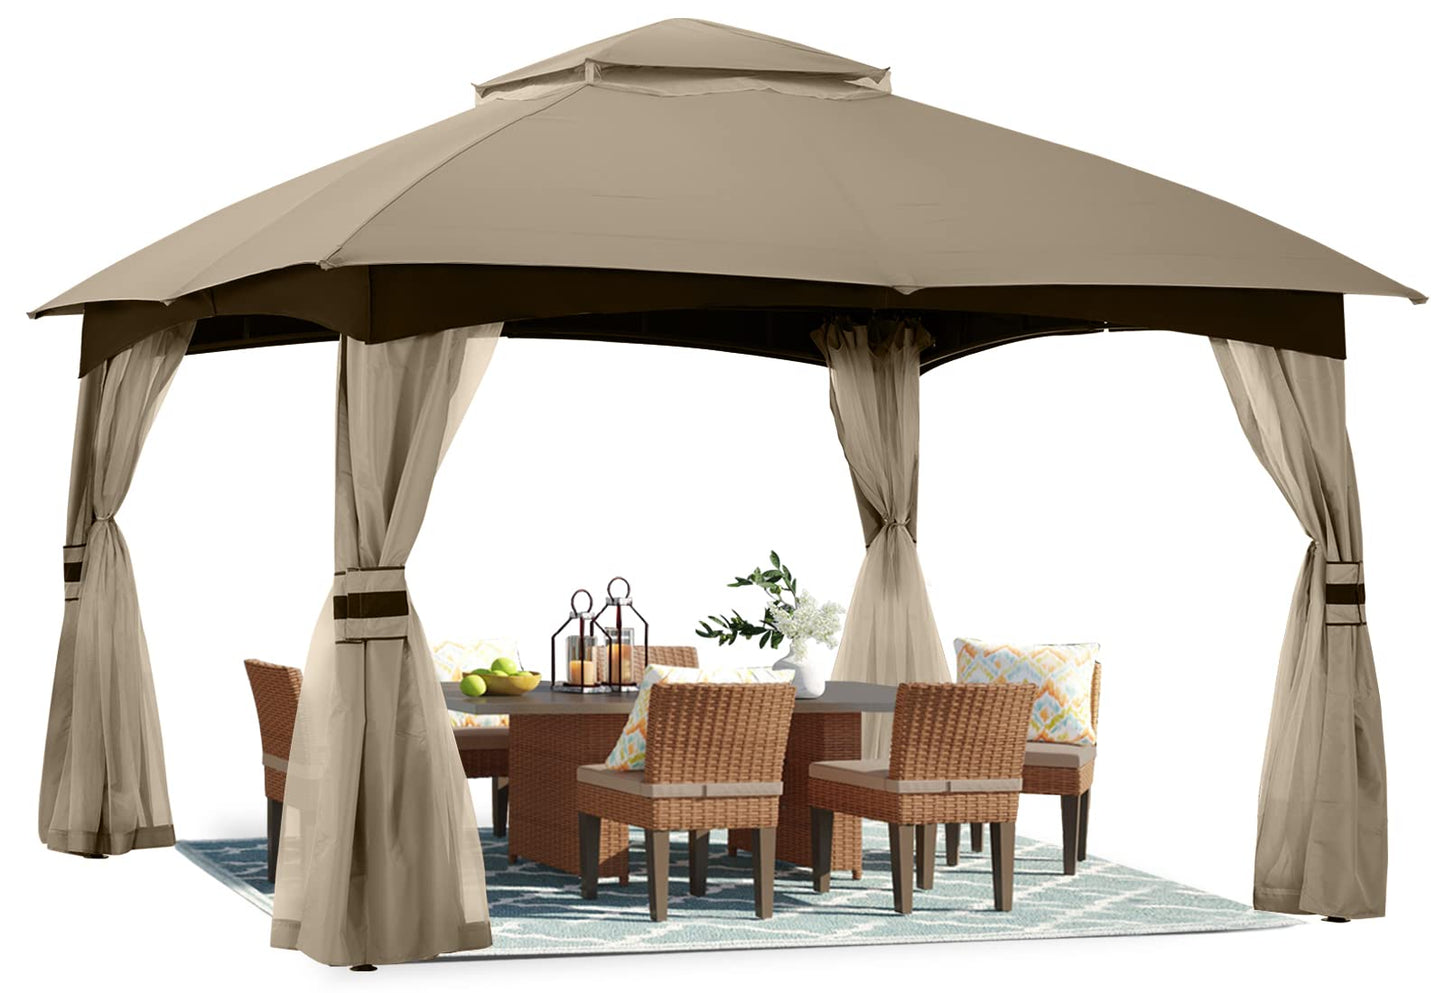 ABCCANOPY 10x20 Outdoor Gazebo - Patio Gazebo with Mosquito Netting, Outdoor Canopies for Shade and Rain for Lawn, Garden, Backyard & Deck (Beige) beige